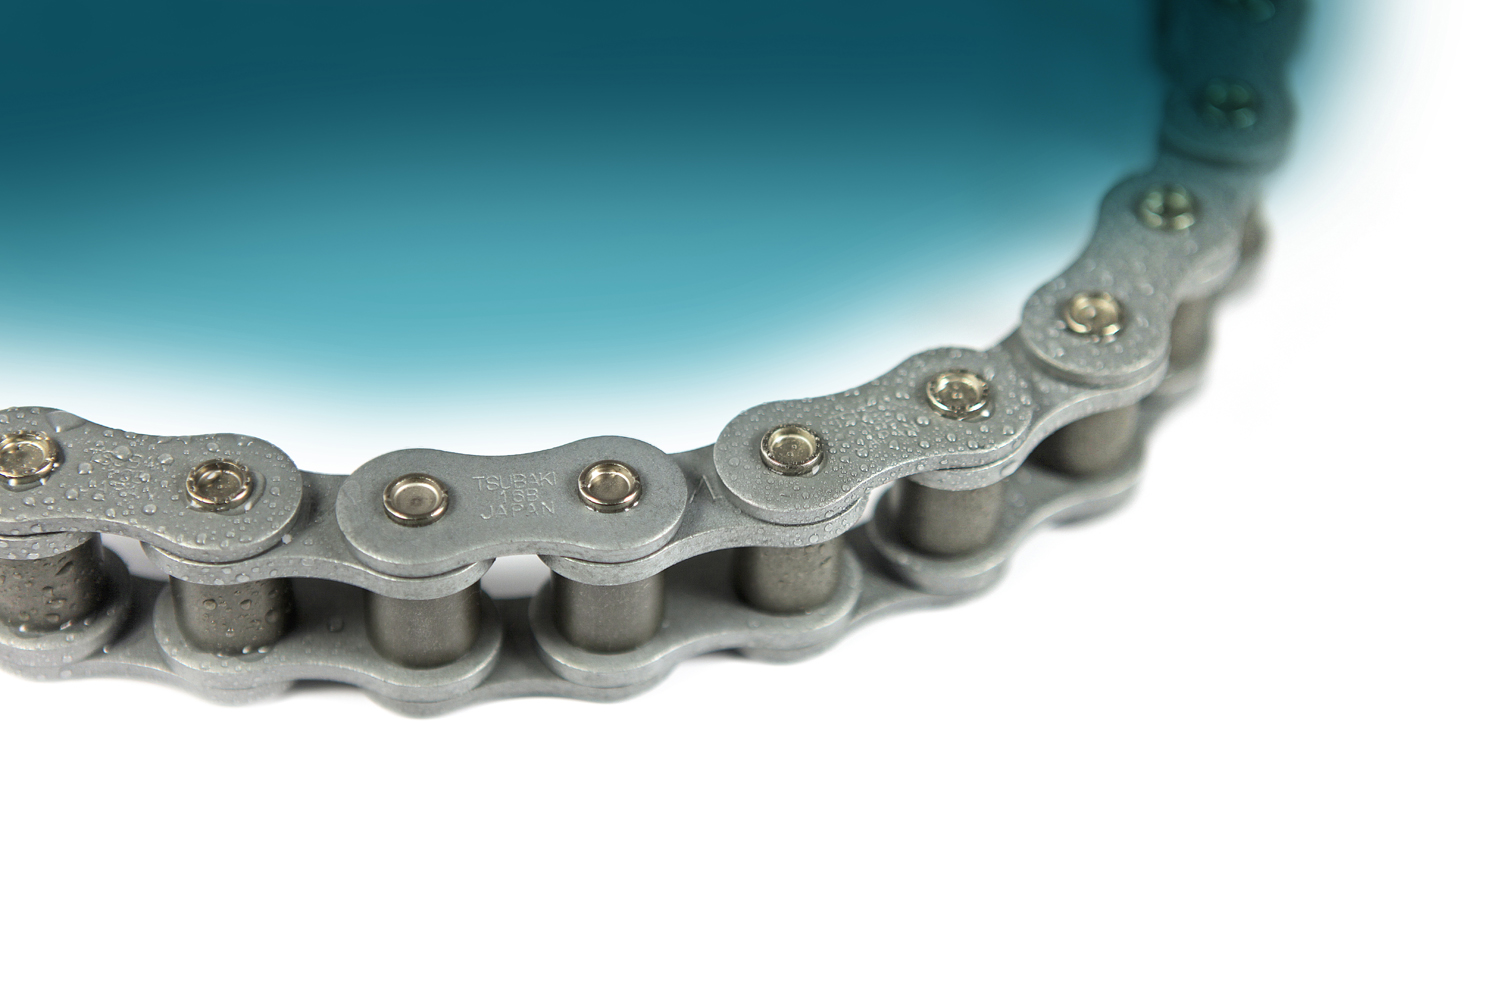 Tsubaki’s Neptune chain is designed for use in corrosive environments and includes a two-stage coating including an outer resin that provides high corrosion and chemical resistance.